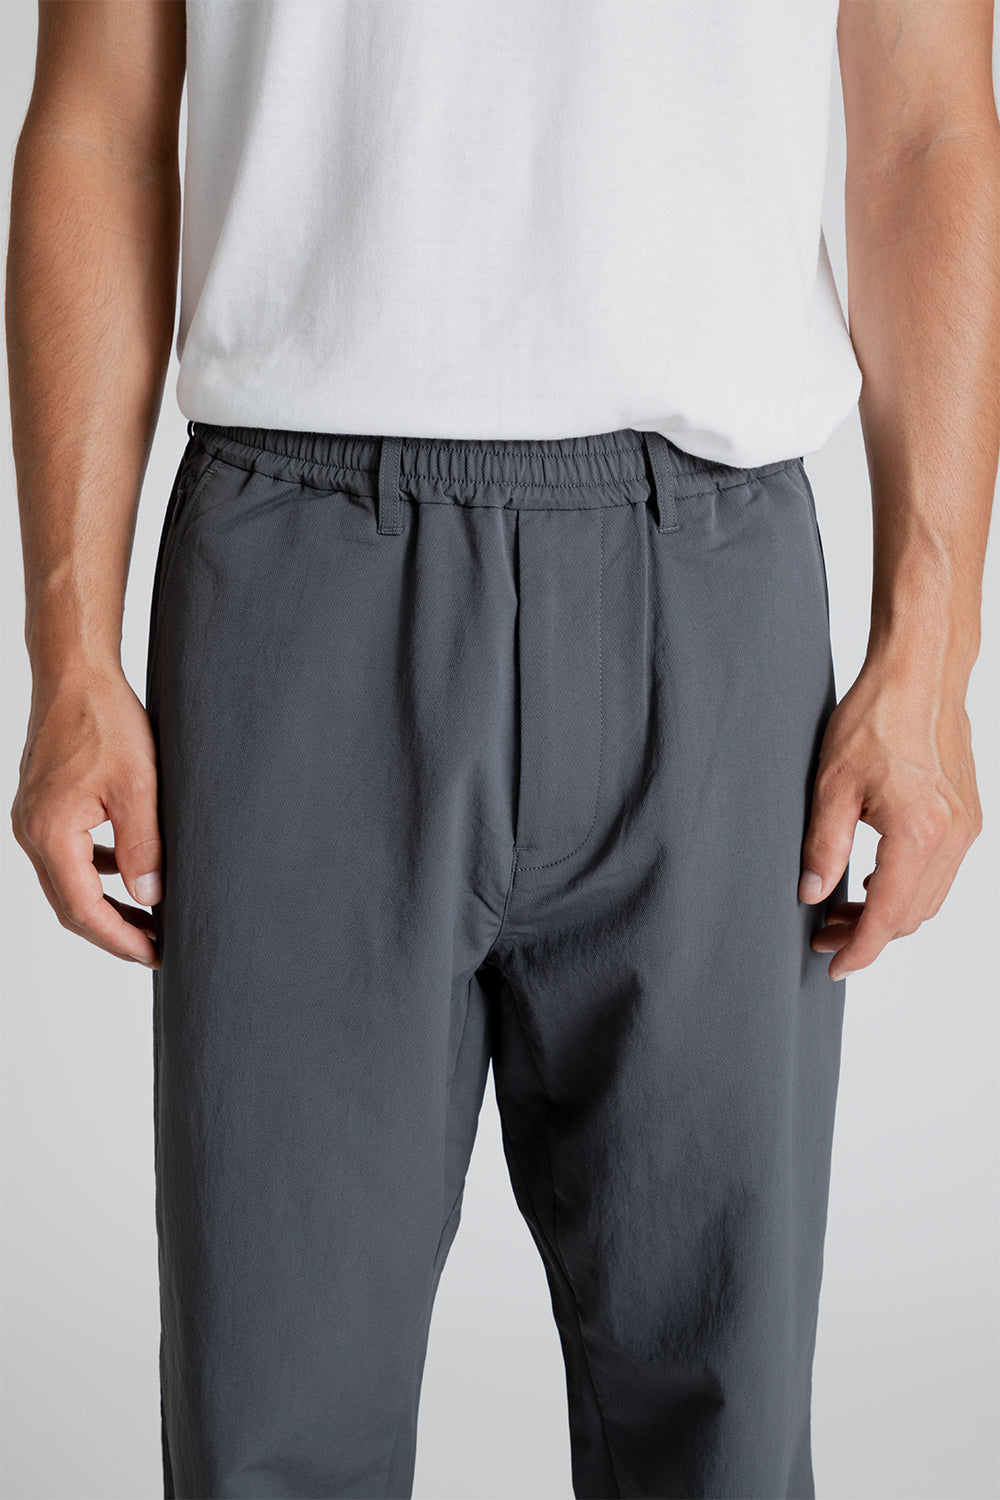 Nanamica ALPHADRY Wide Easy Pants in Gray